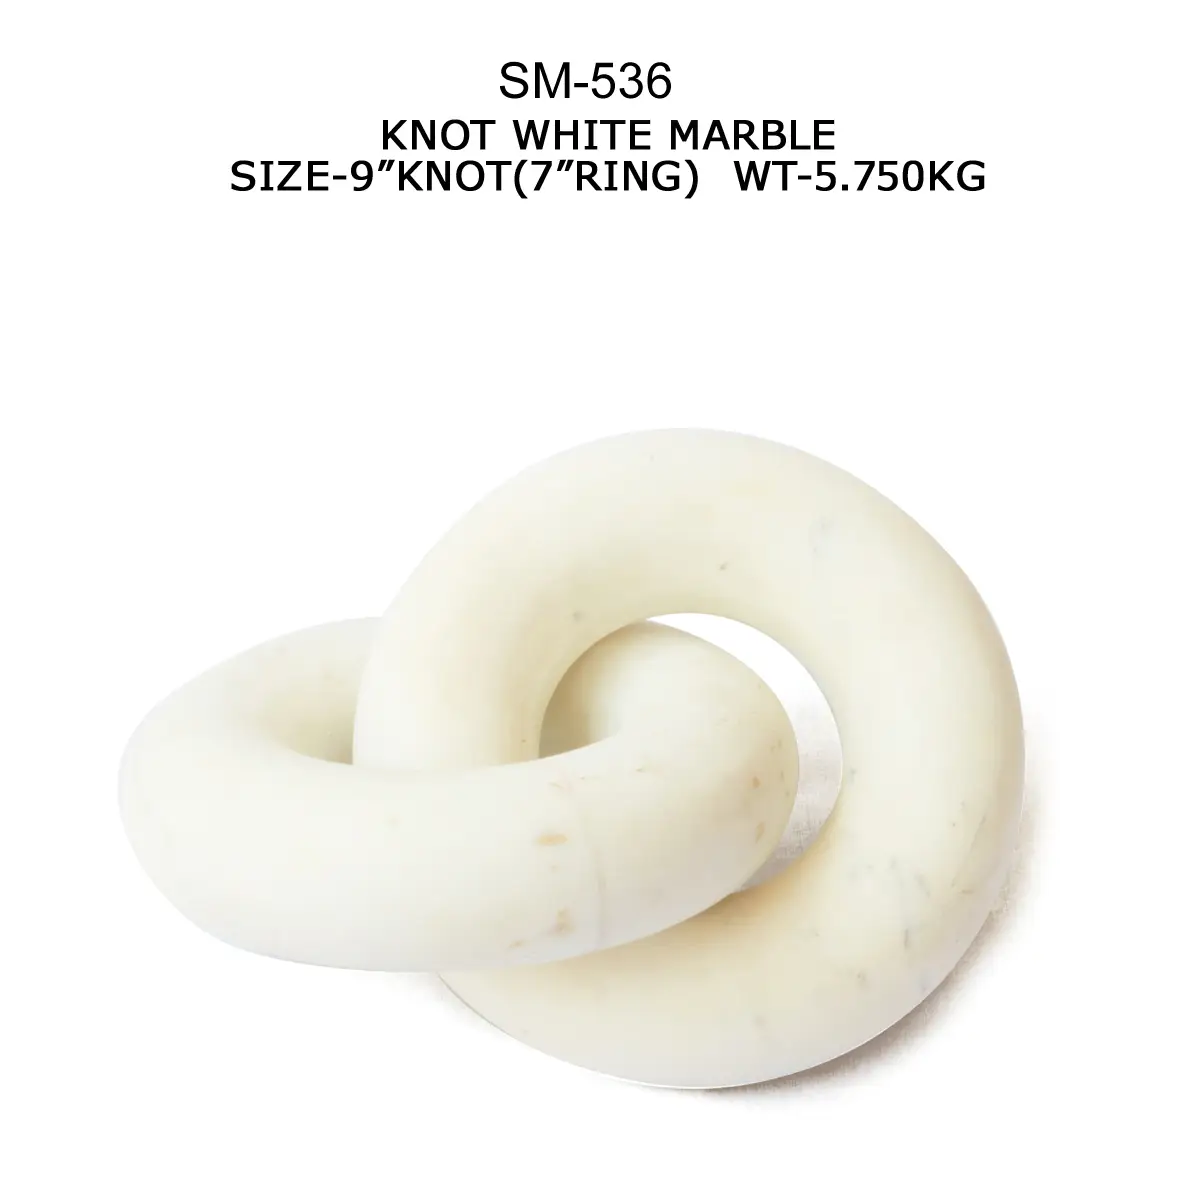 WHITE MARBLE KNOT SAMPLE